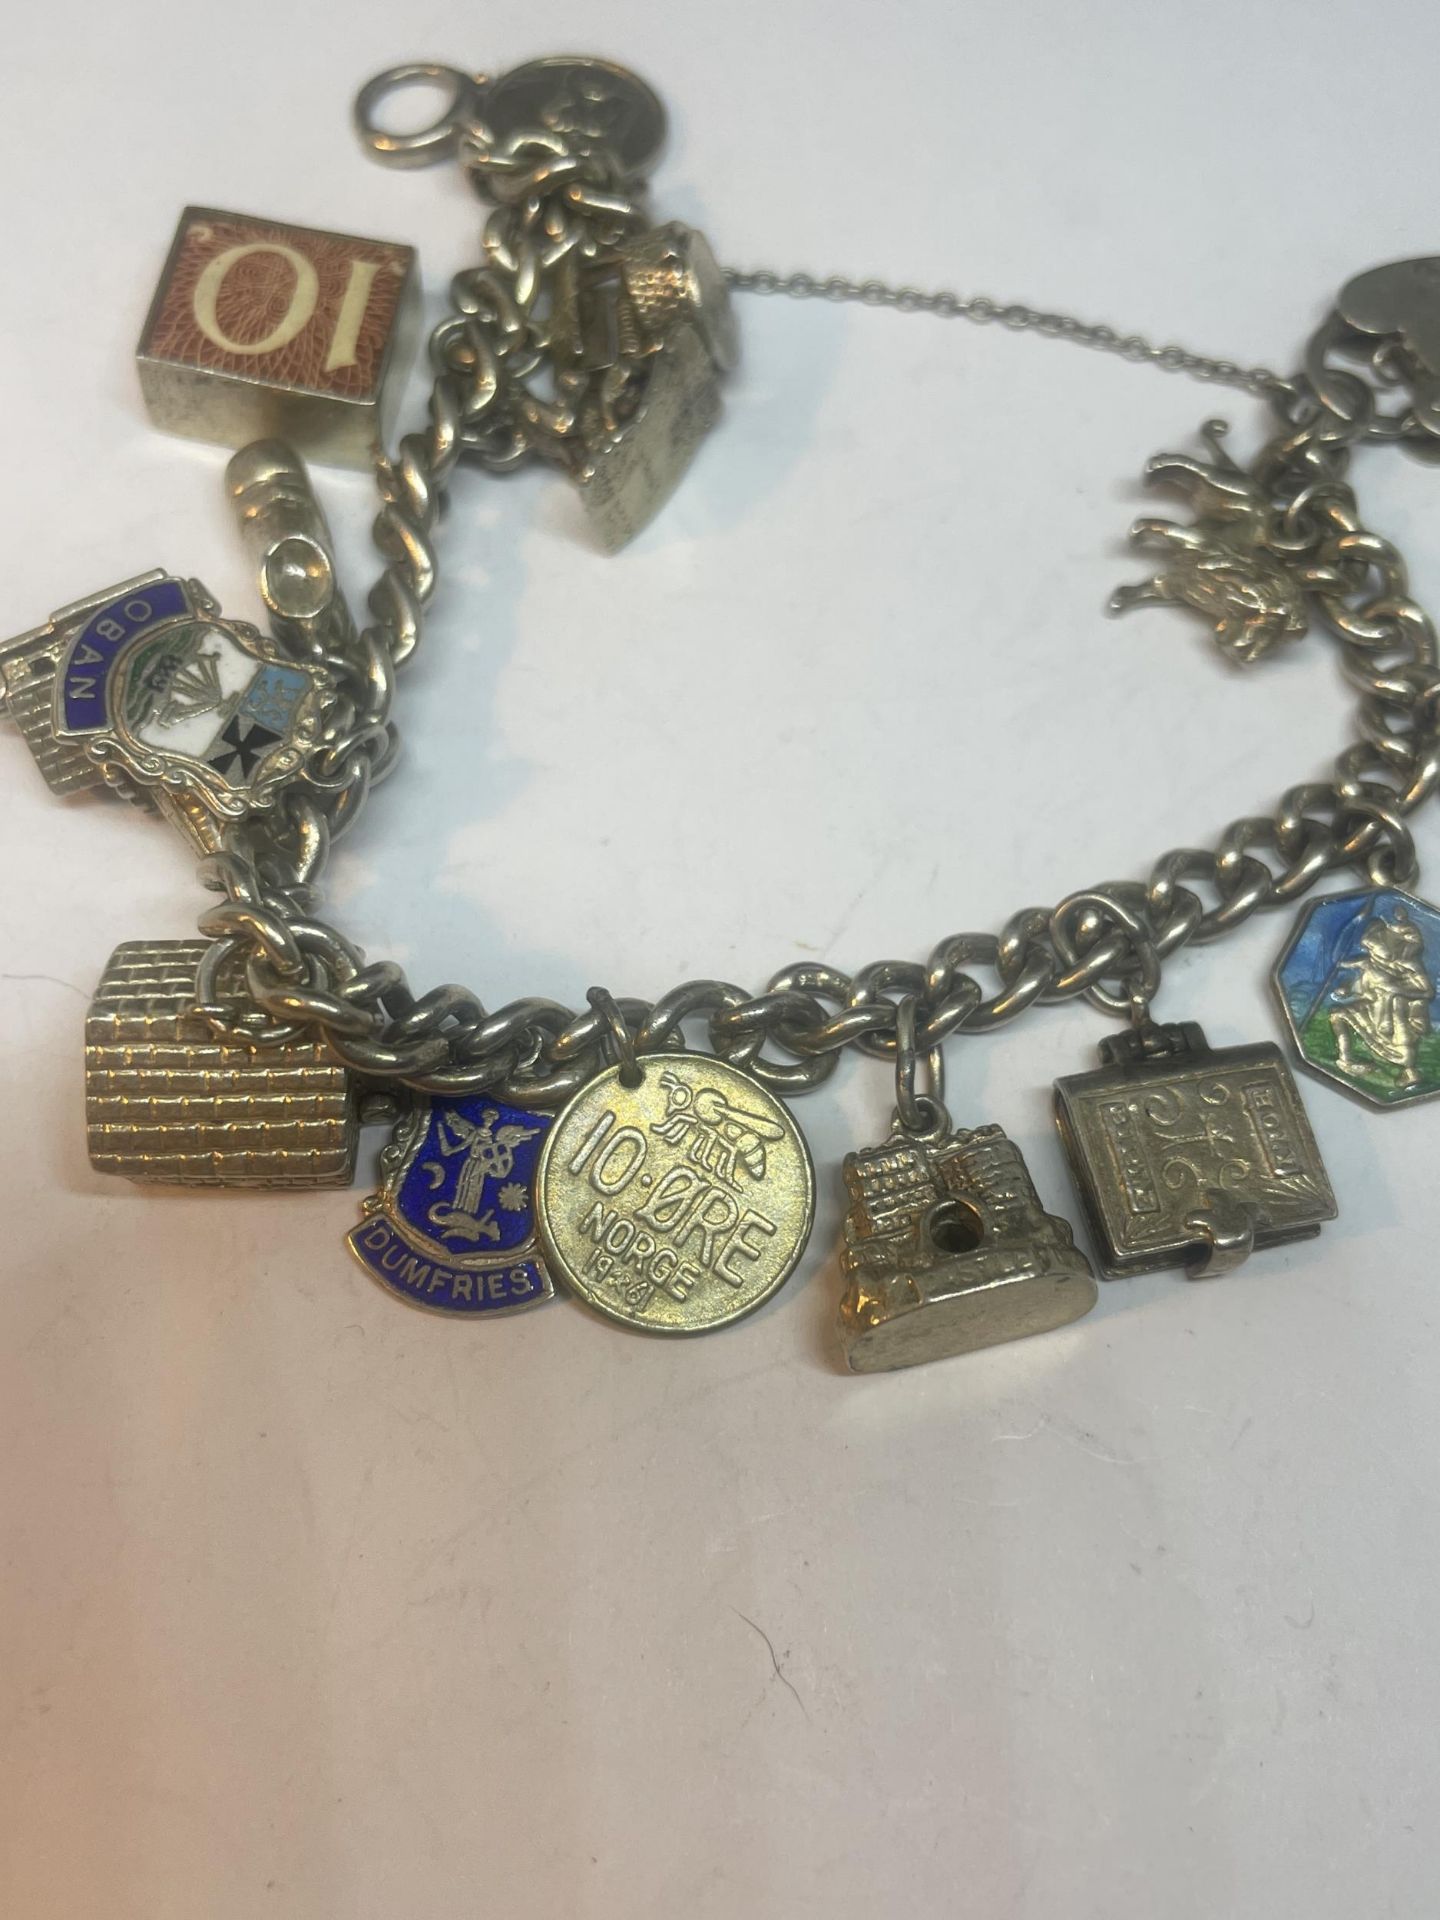 A SILVER CHARM BRACELET WITH FIFTEEN CHARMS AND A HEART PADLOCK - Image 3 of 4